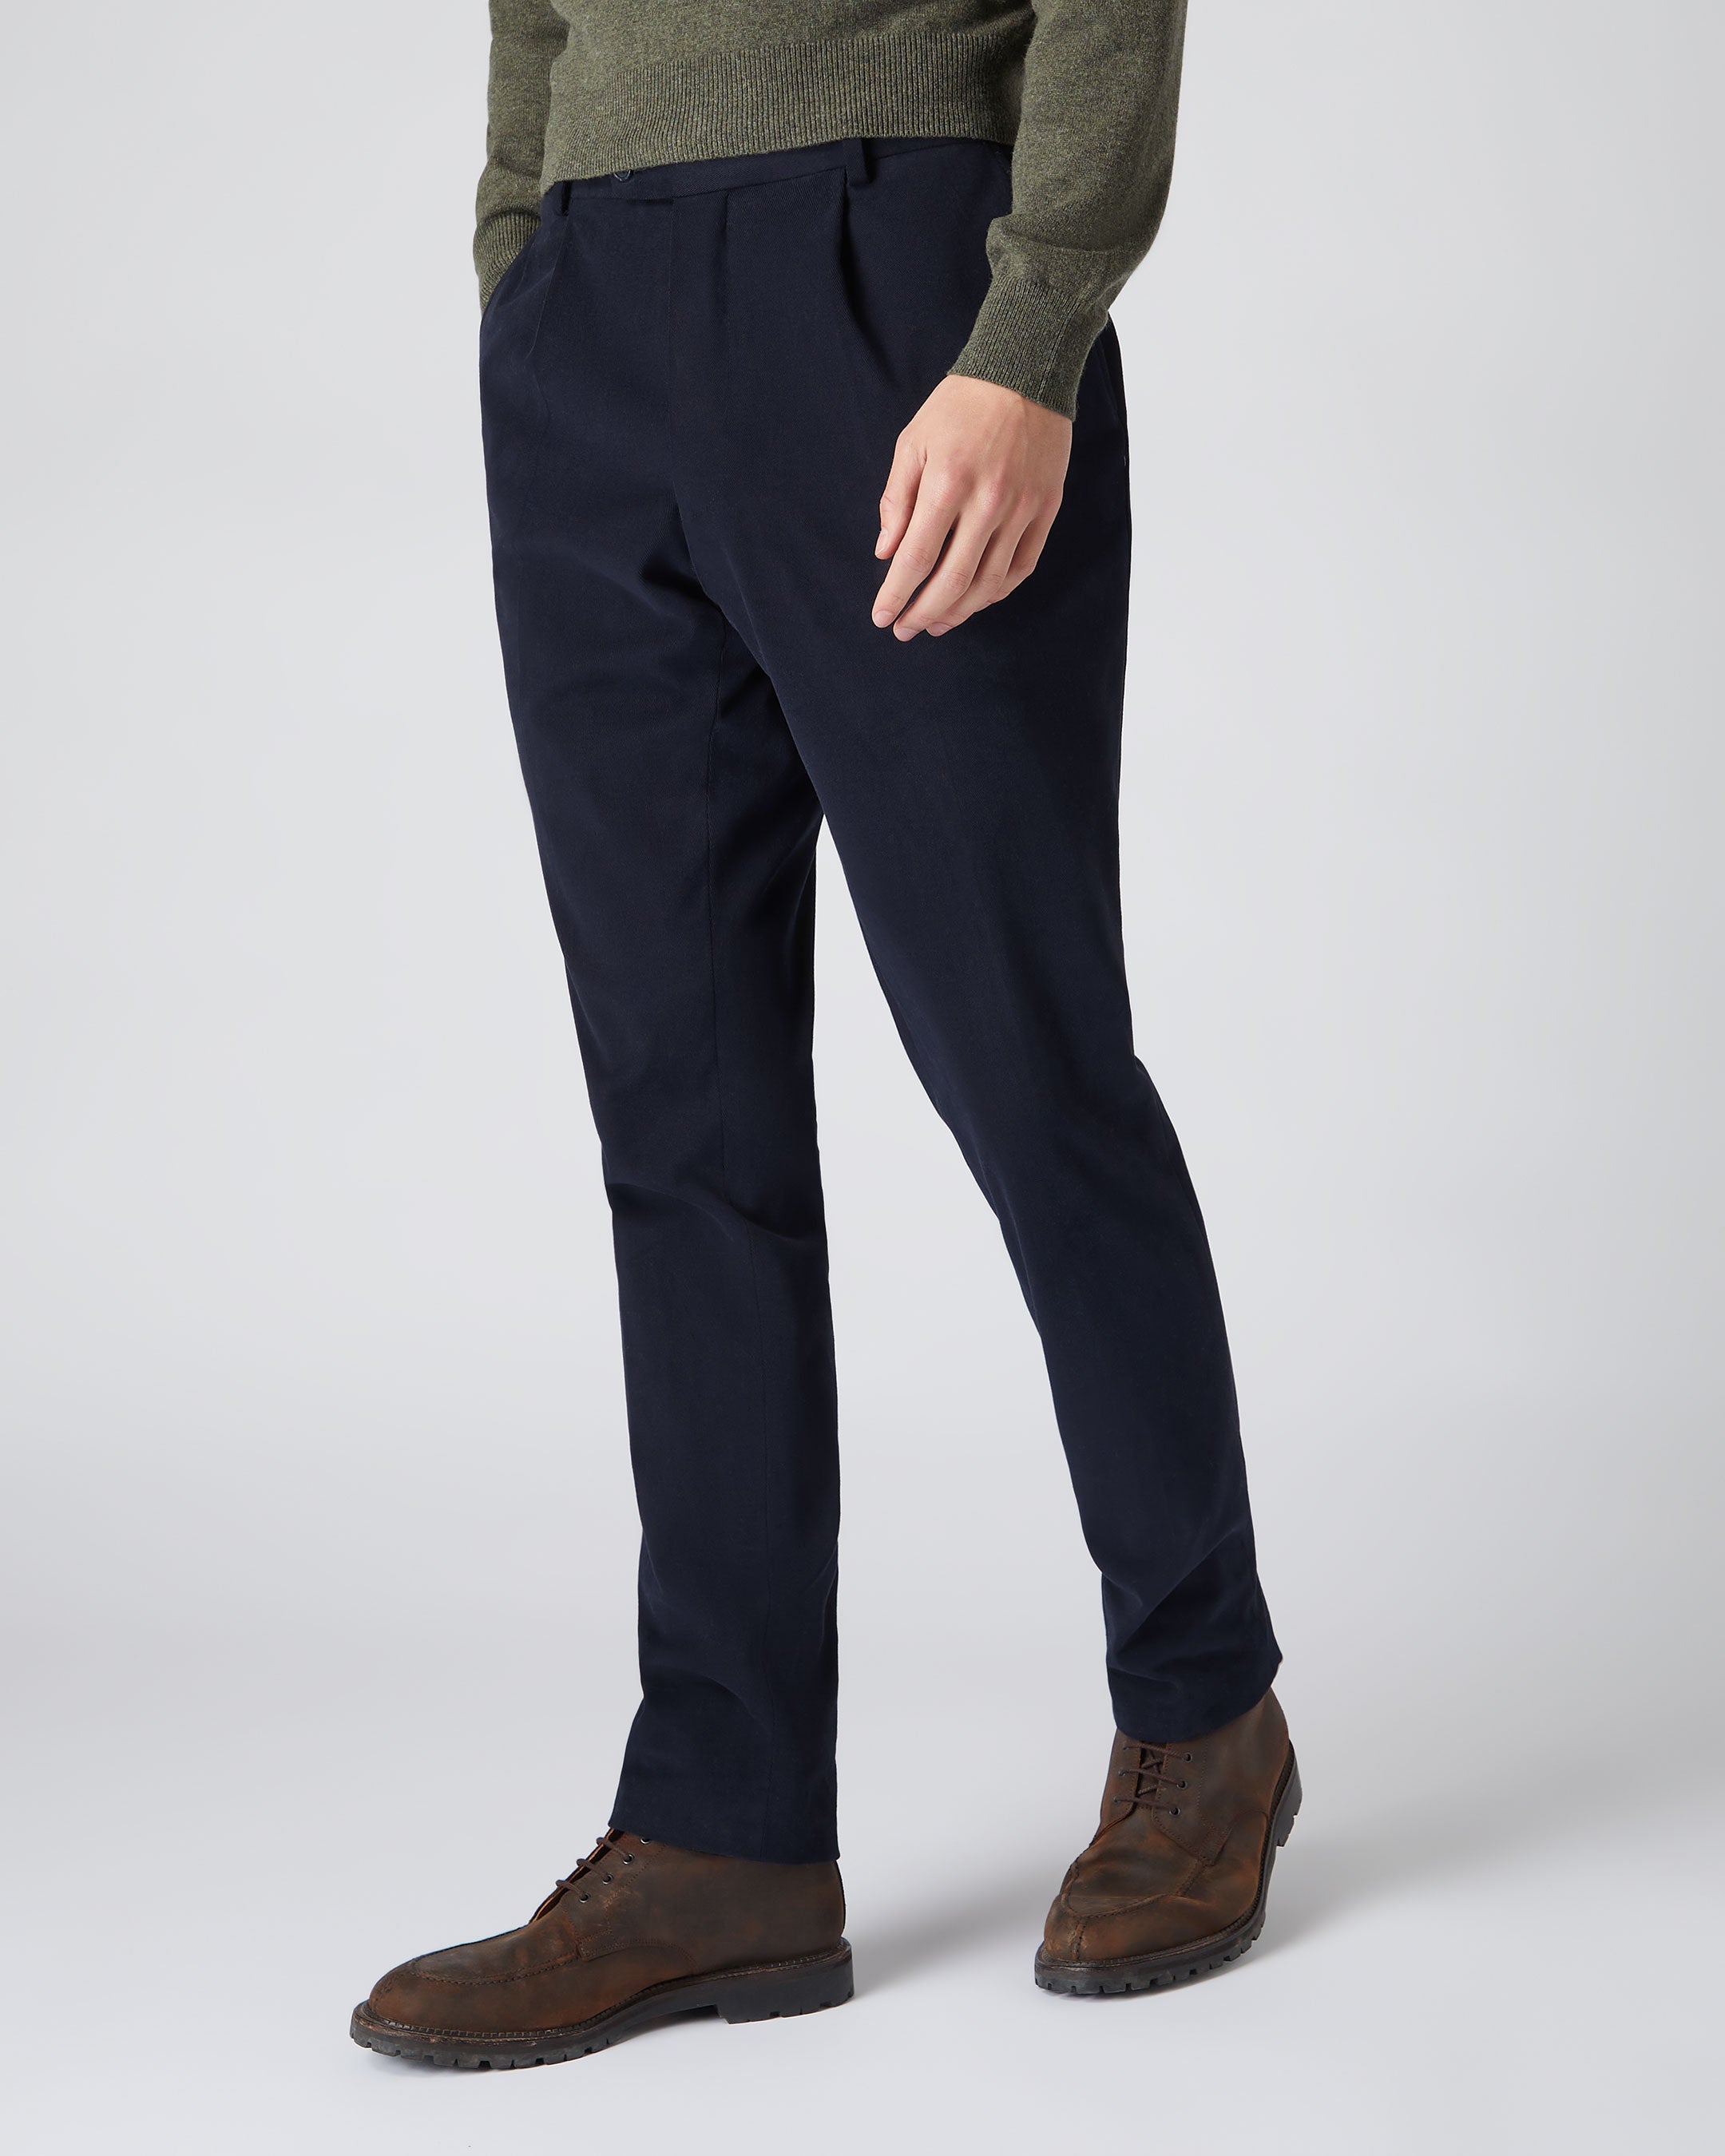 Men's Relaxed Chino - Royal Blue - Community Clothing